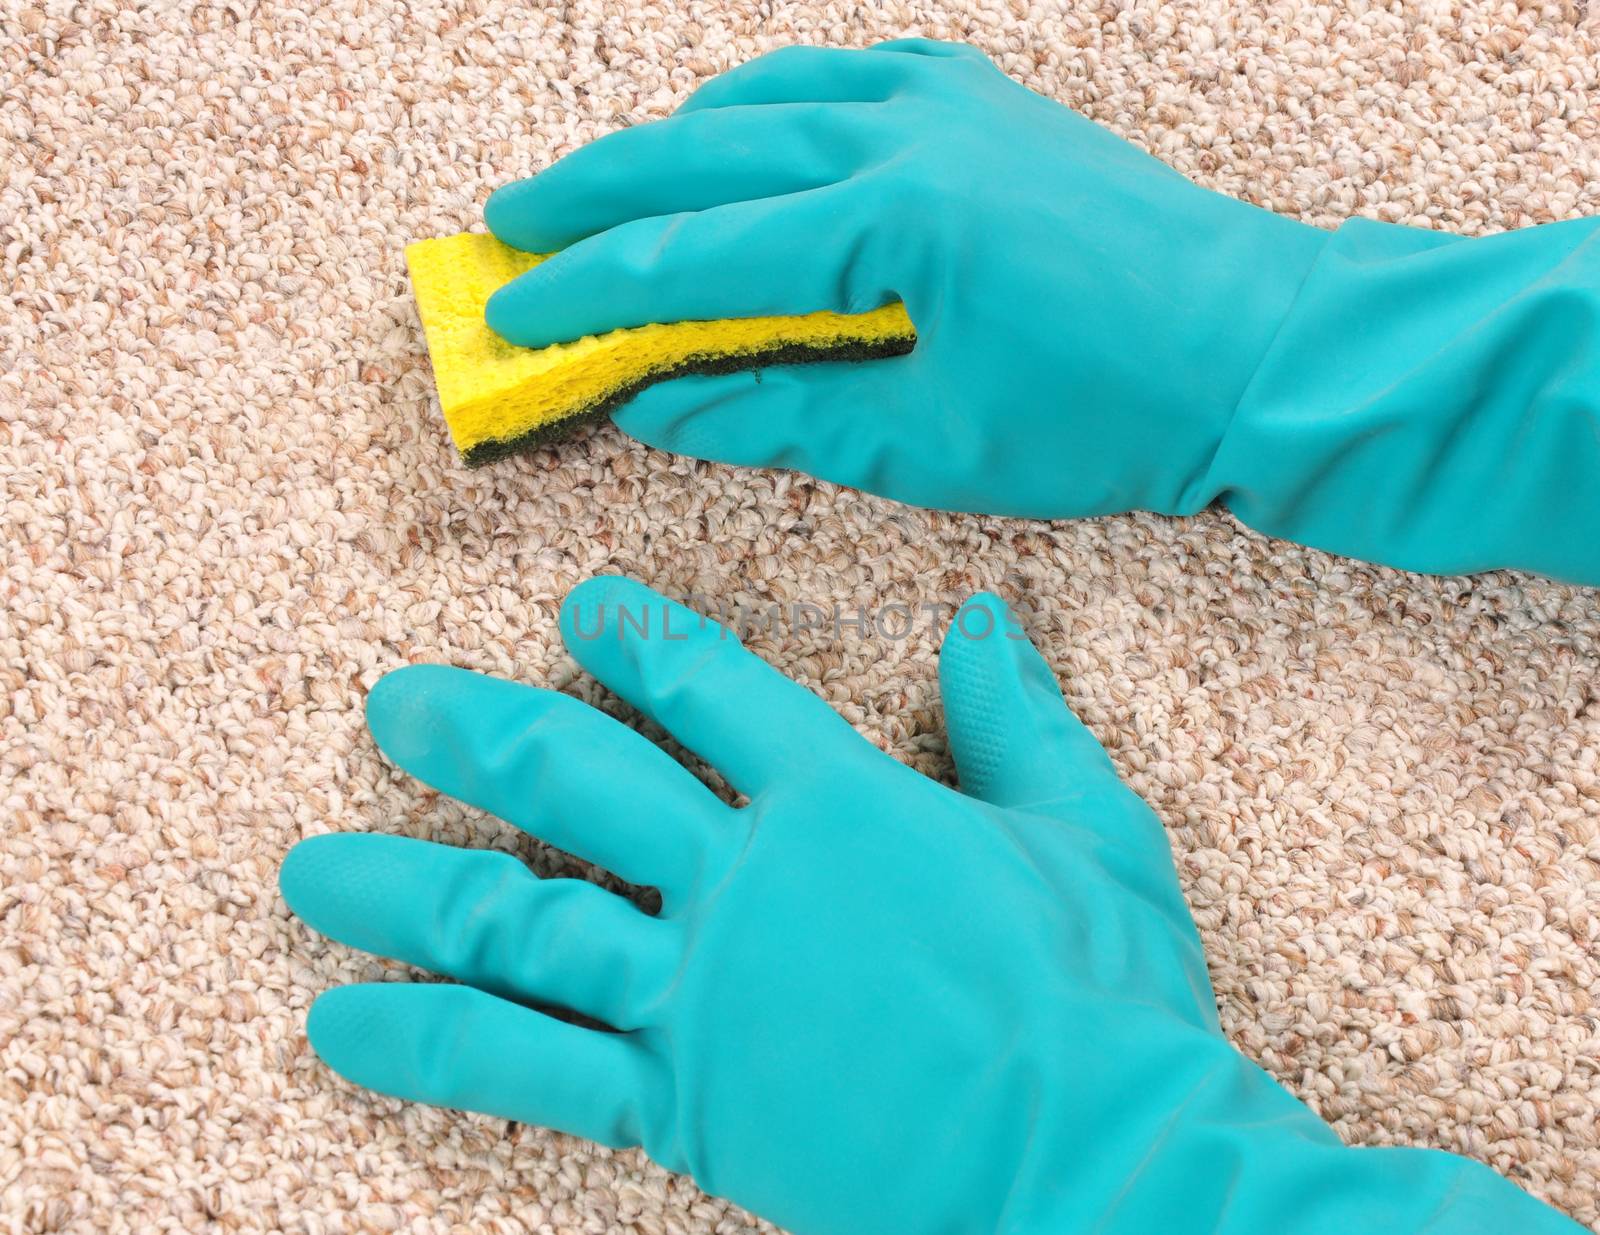 Cleaning carpet with sponge and gloves